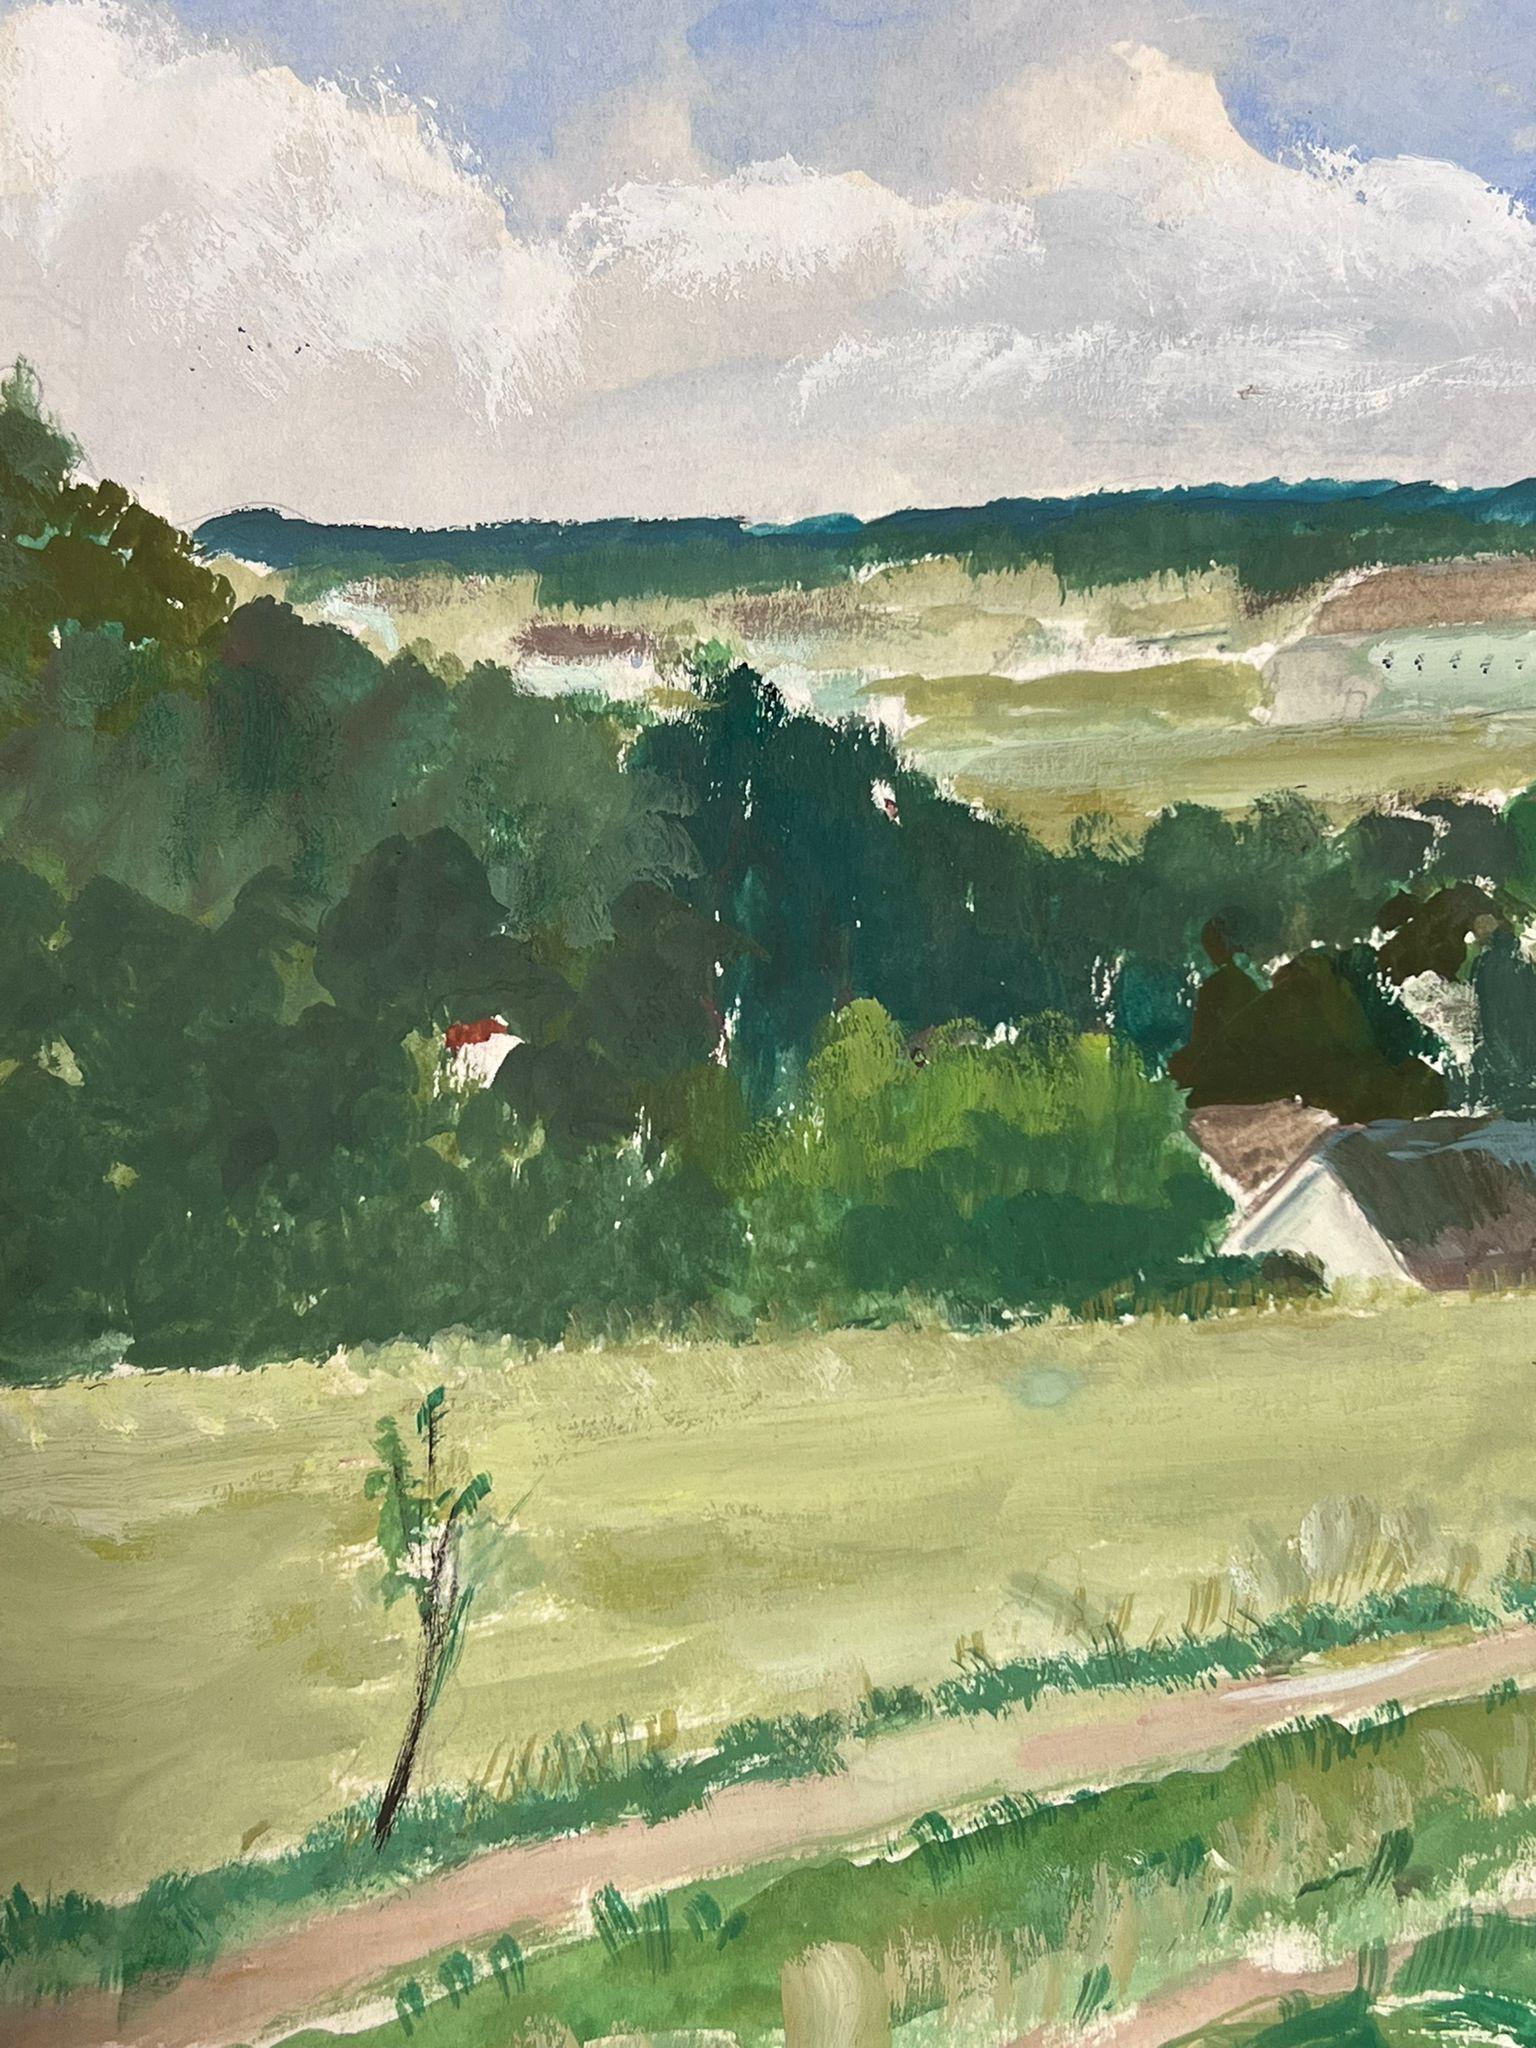 French Landscape
signed by Louise Alix, French 1950's Impressionist 
gouache on artist paper, unframed
painting: 8 x 10.5 inches
provenance: from a large private collection of this artists work in Northern France
condition: original, good and sound